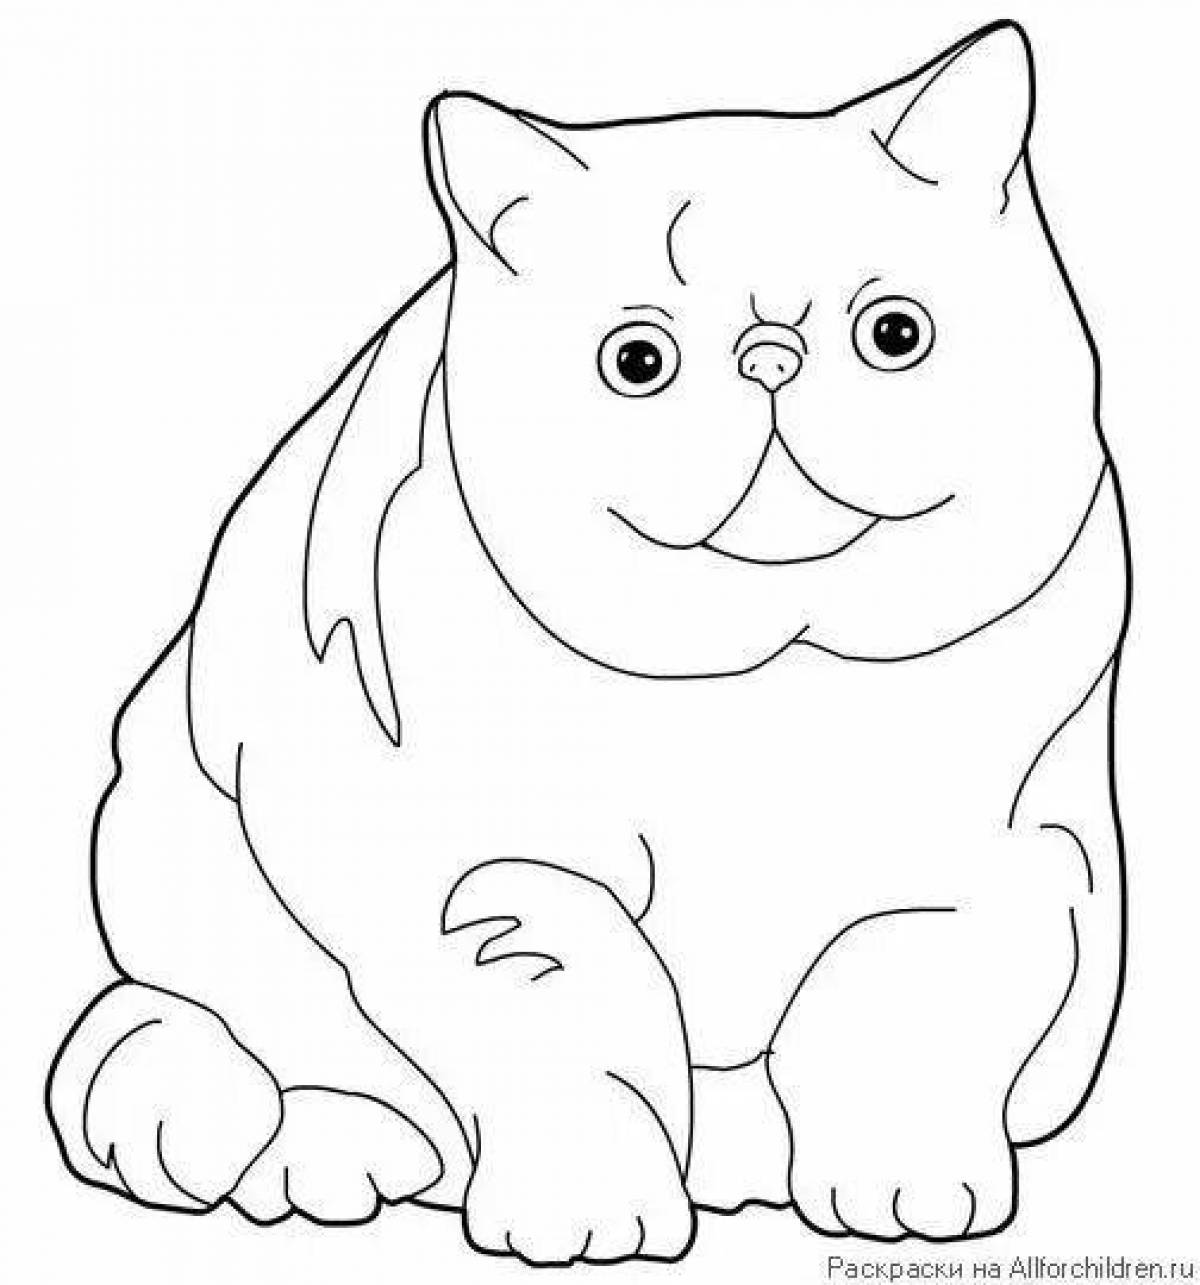 Coloring page playful fat cat